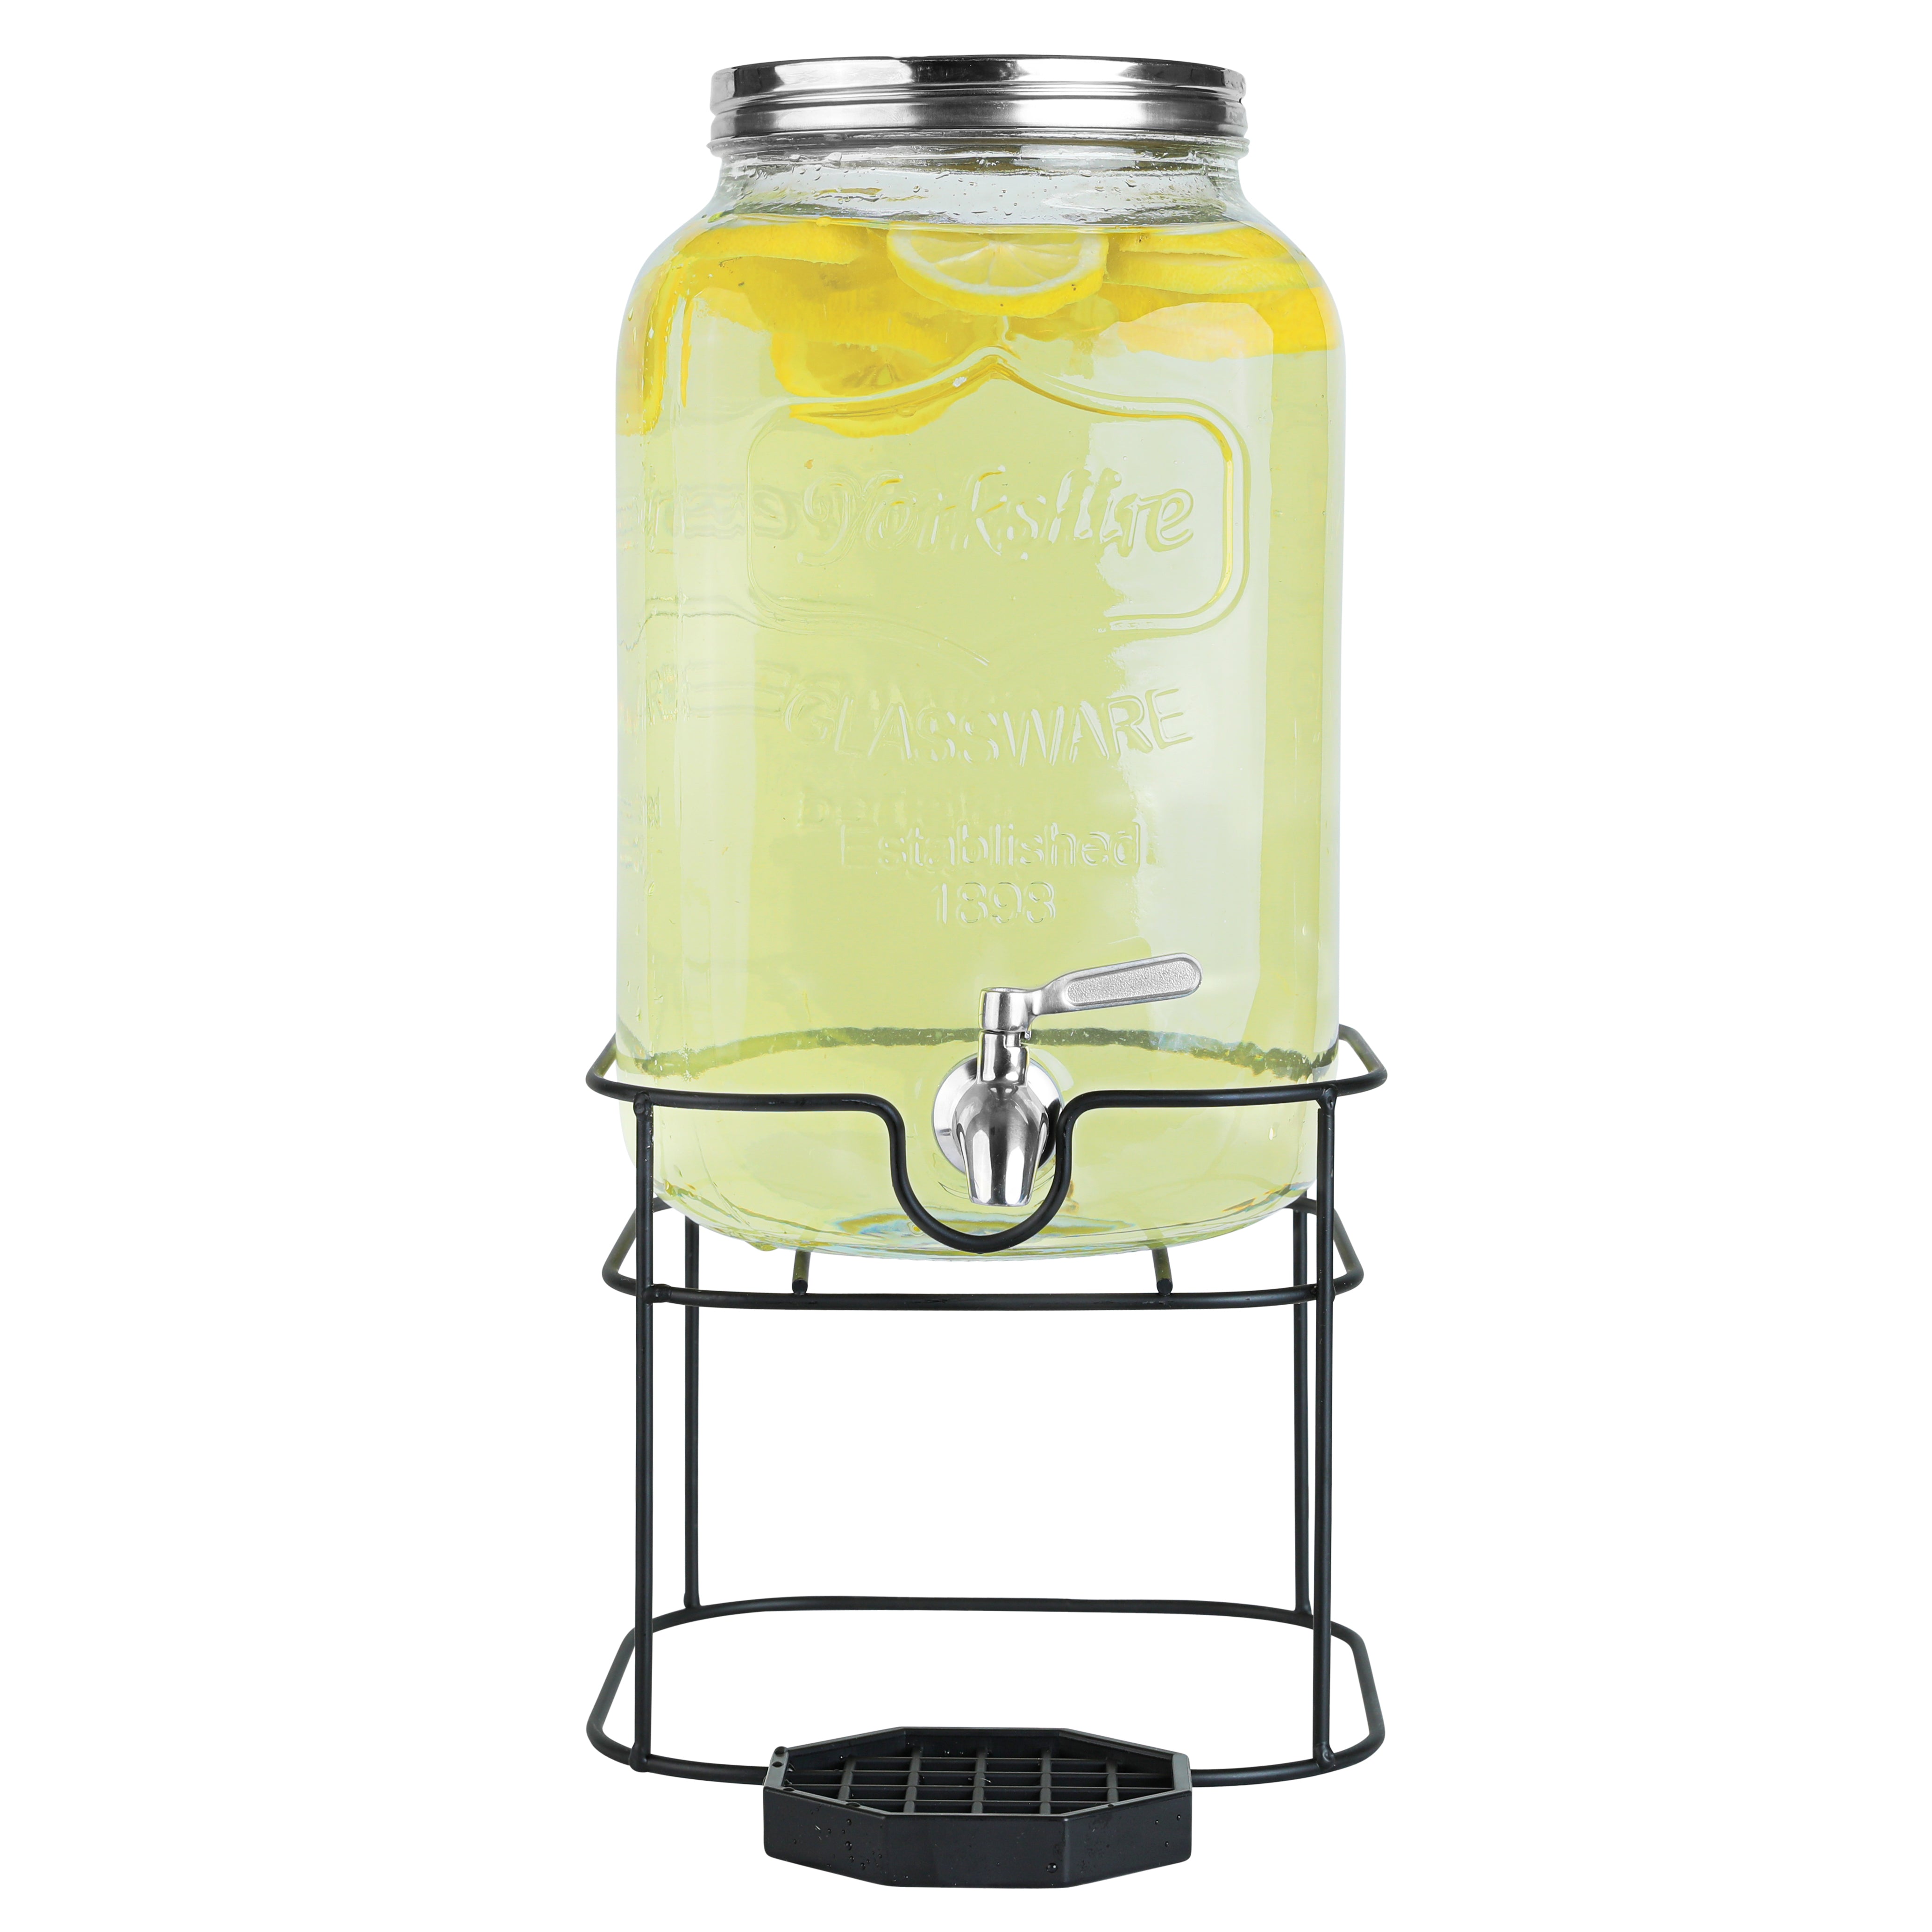 2.5 Gallon Glass Beverage Dispenser with Stainless Steel Spigot on Metal  Stand and Drip Tray- Mason Drink Dispenser For Parties, Sun Tea, Iced Tea